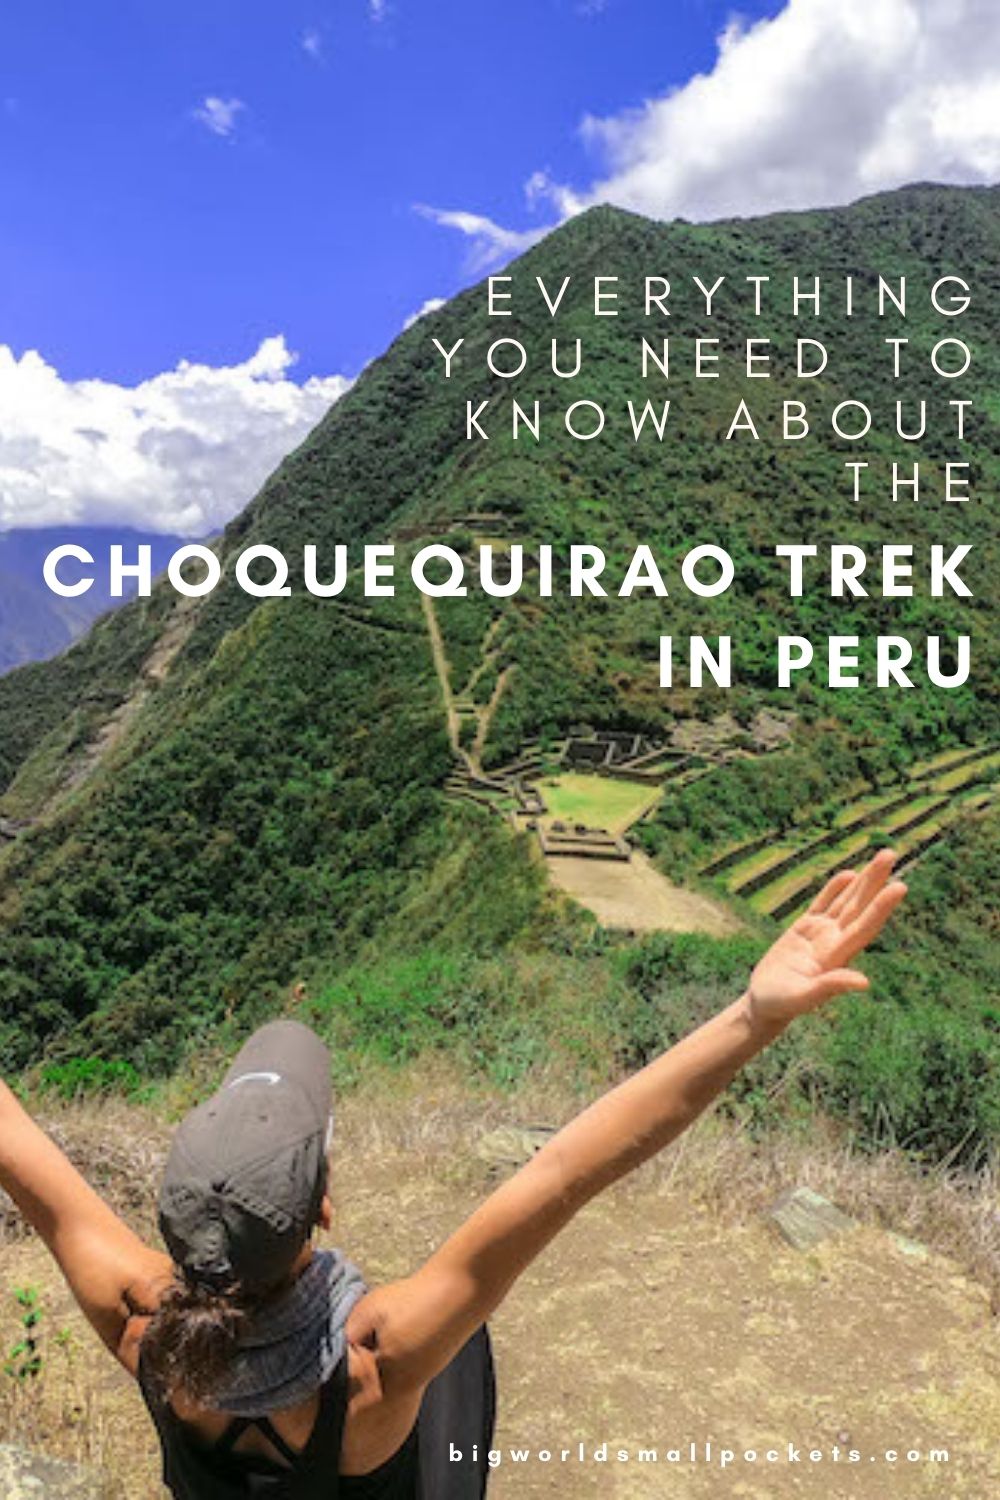 All You Need to Know About the Choquequirao Trek in Peru